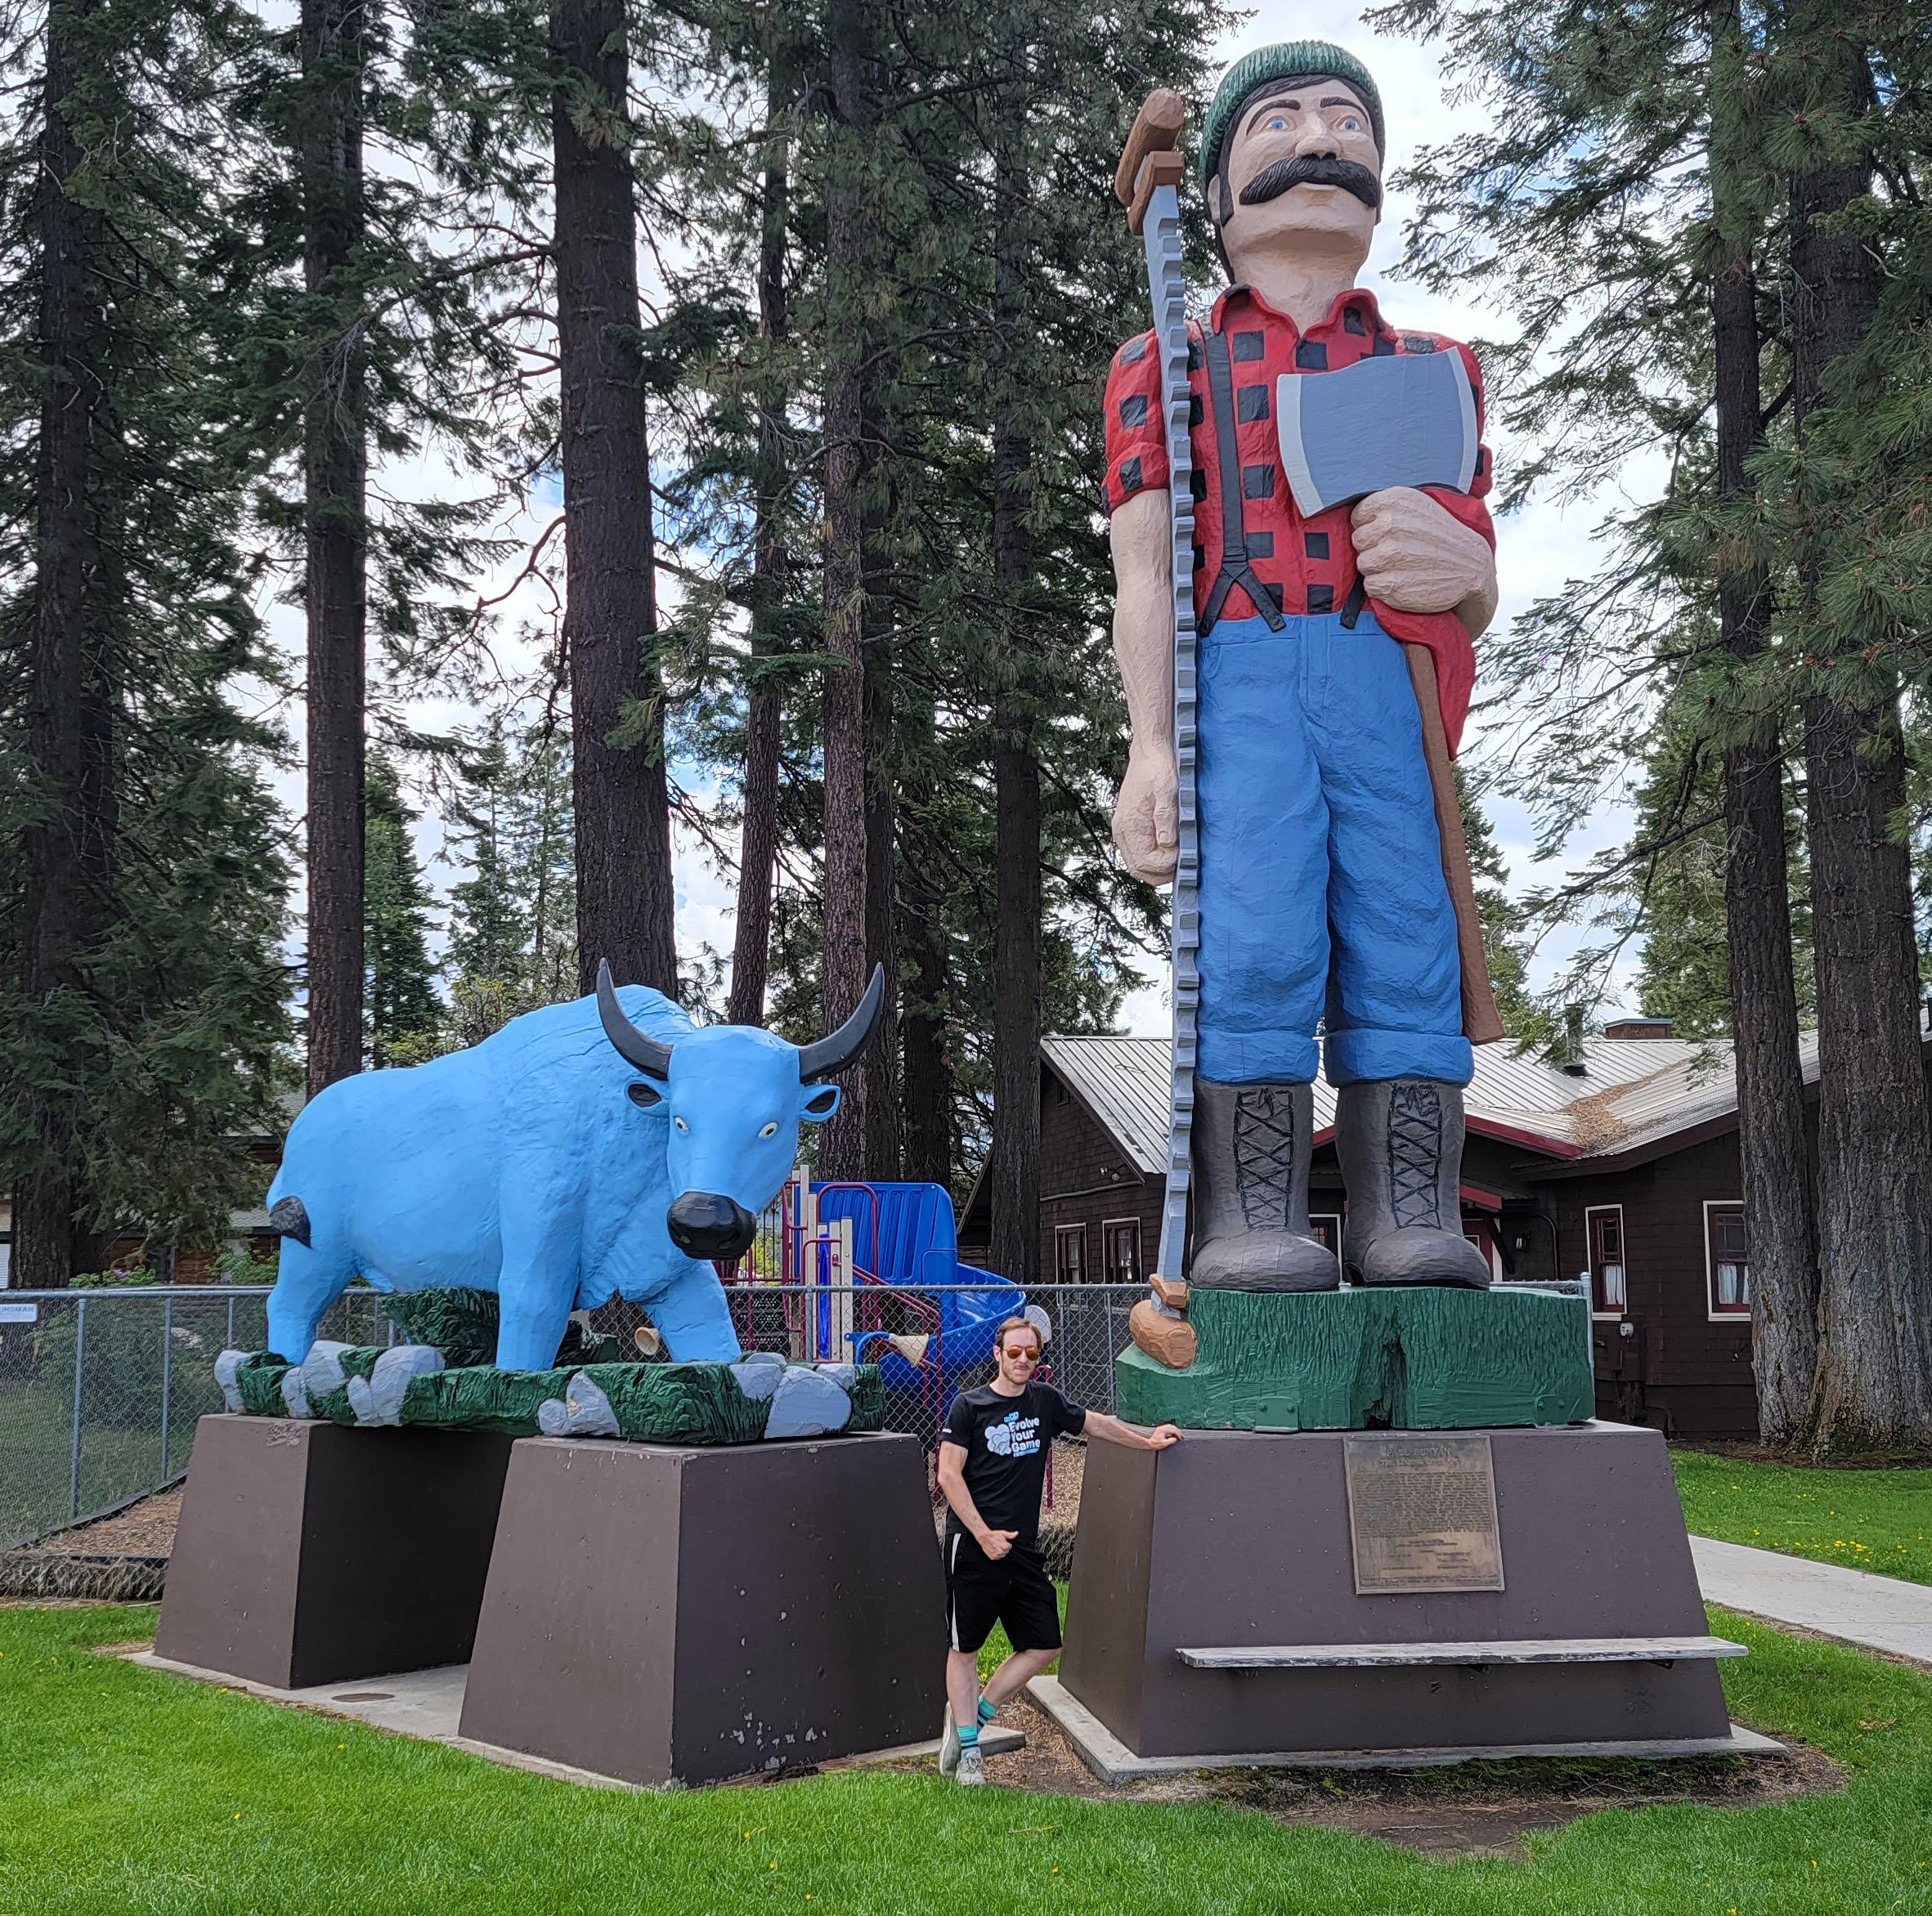 Passing through Westwood, CA, to check out this huge wooden status of Paul Bunyan and his historically accurate ox.